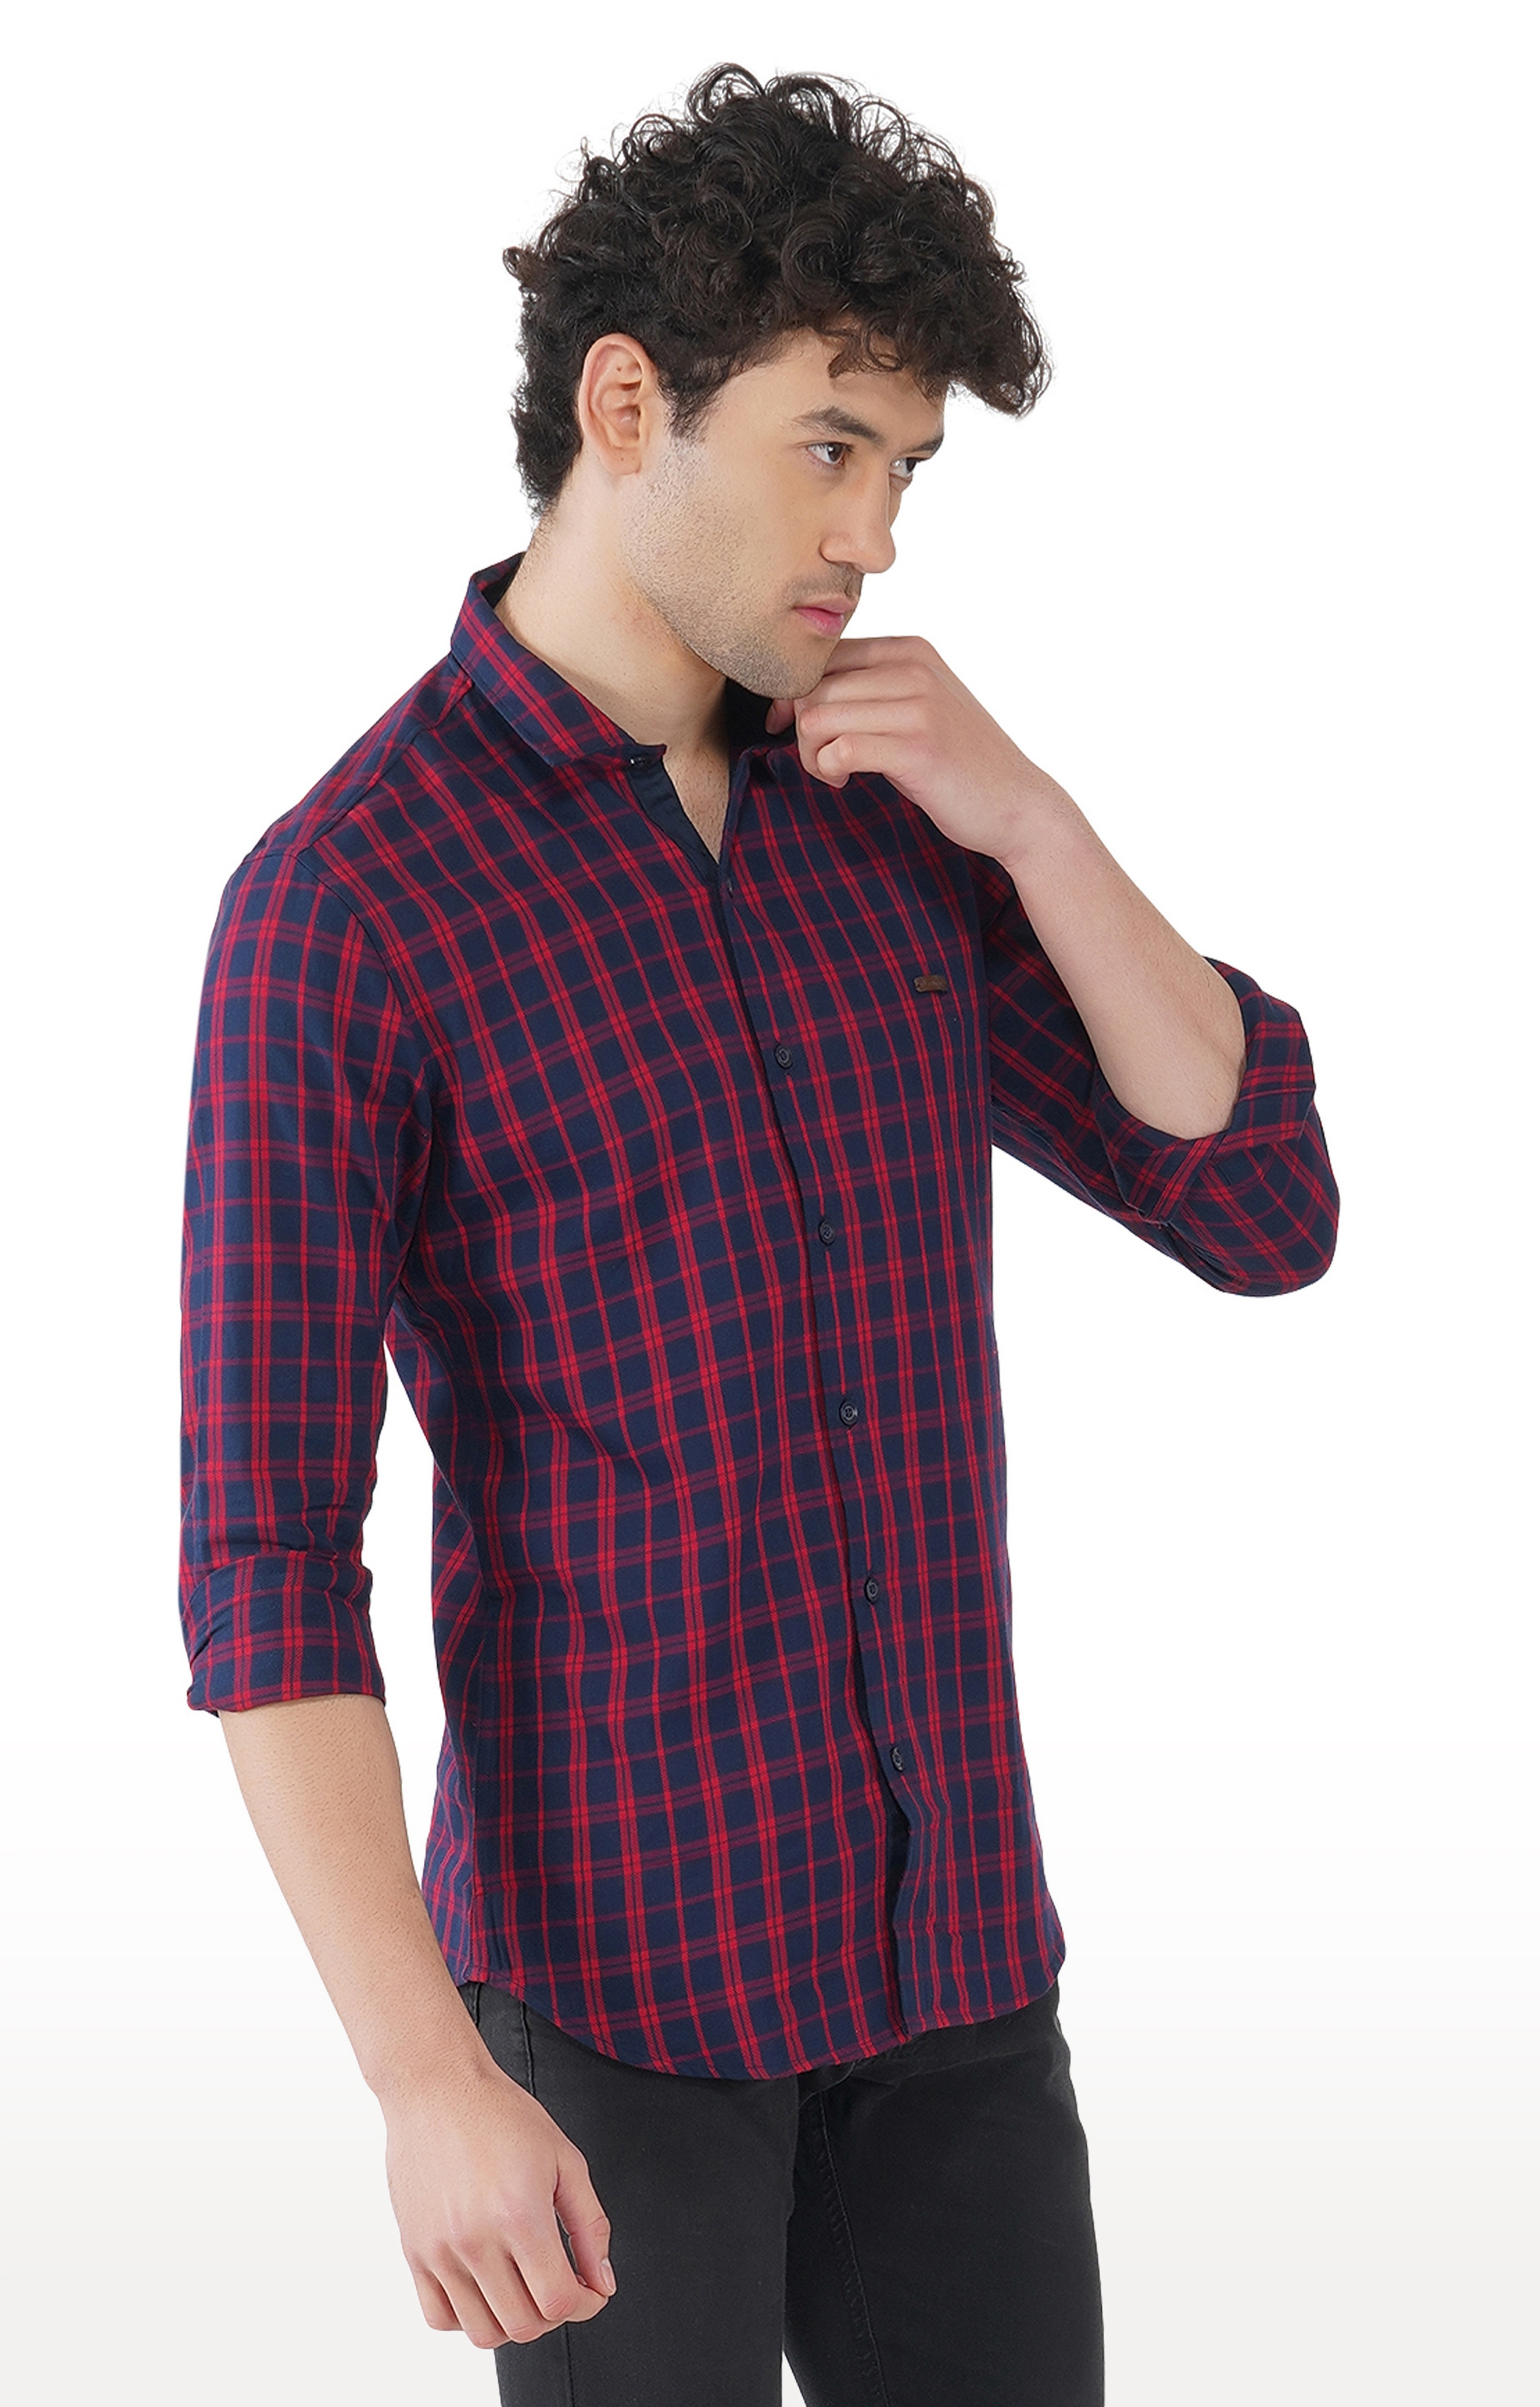 OUTLAWS | Outlaws 7041 - 100% Cotton Multi Color Check Smart Fit Shirt 4